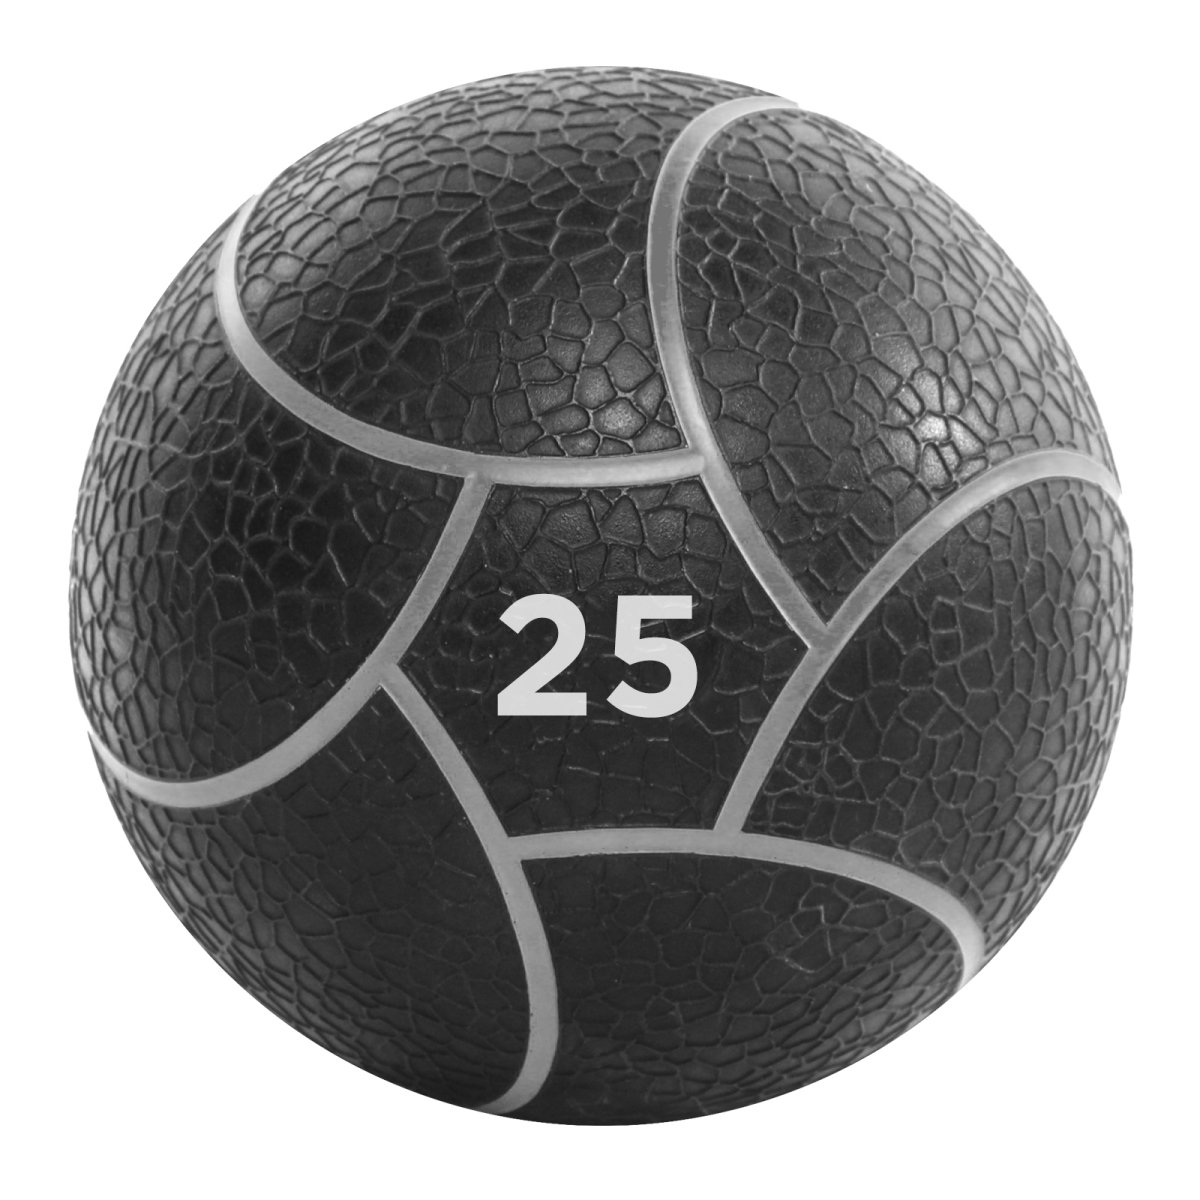 Picture of Power Systems 25725 Elite Power Med Ball Prime 25 lb. Gray